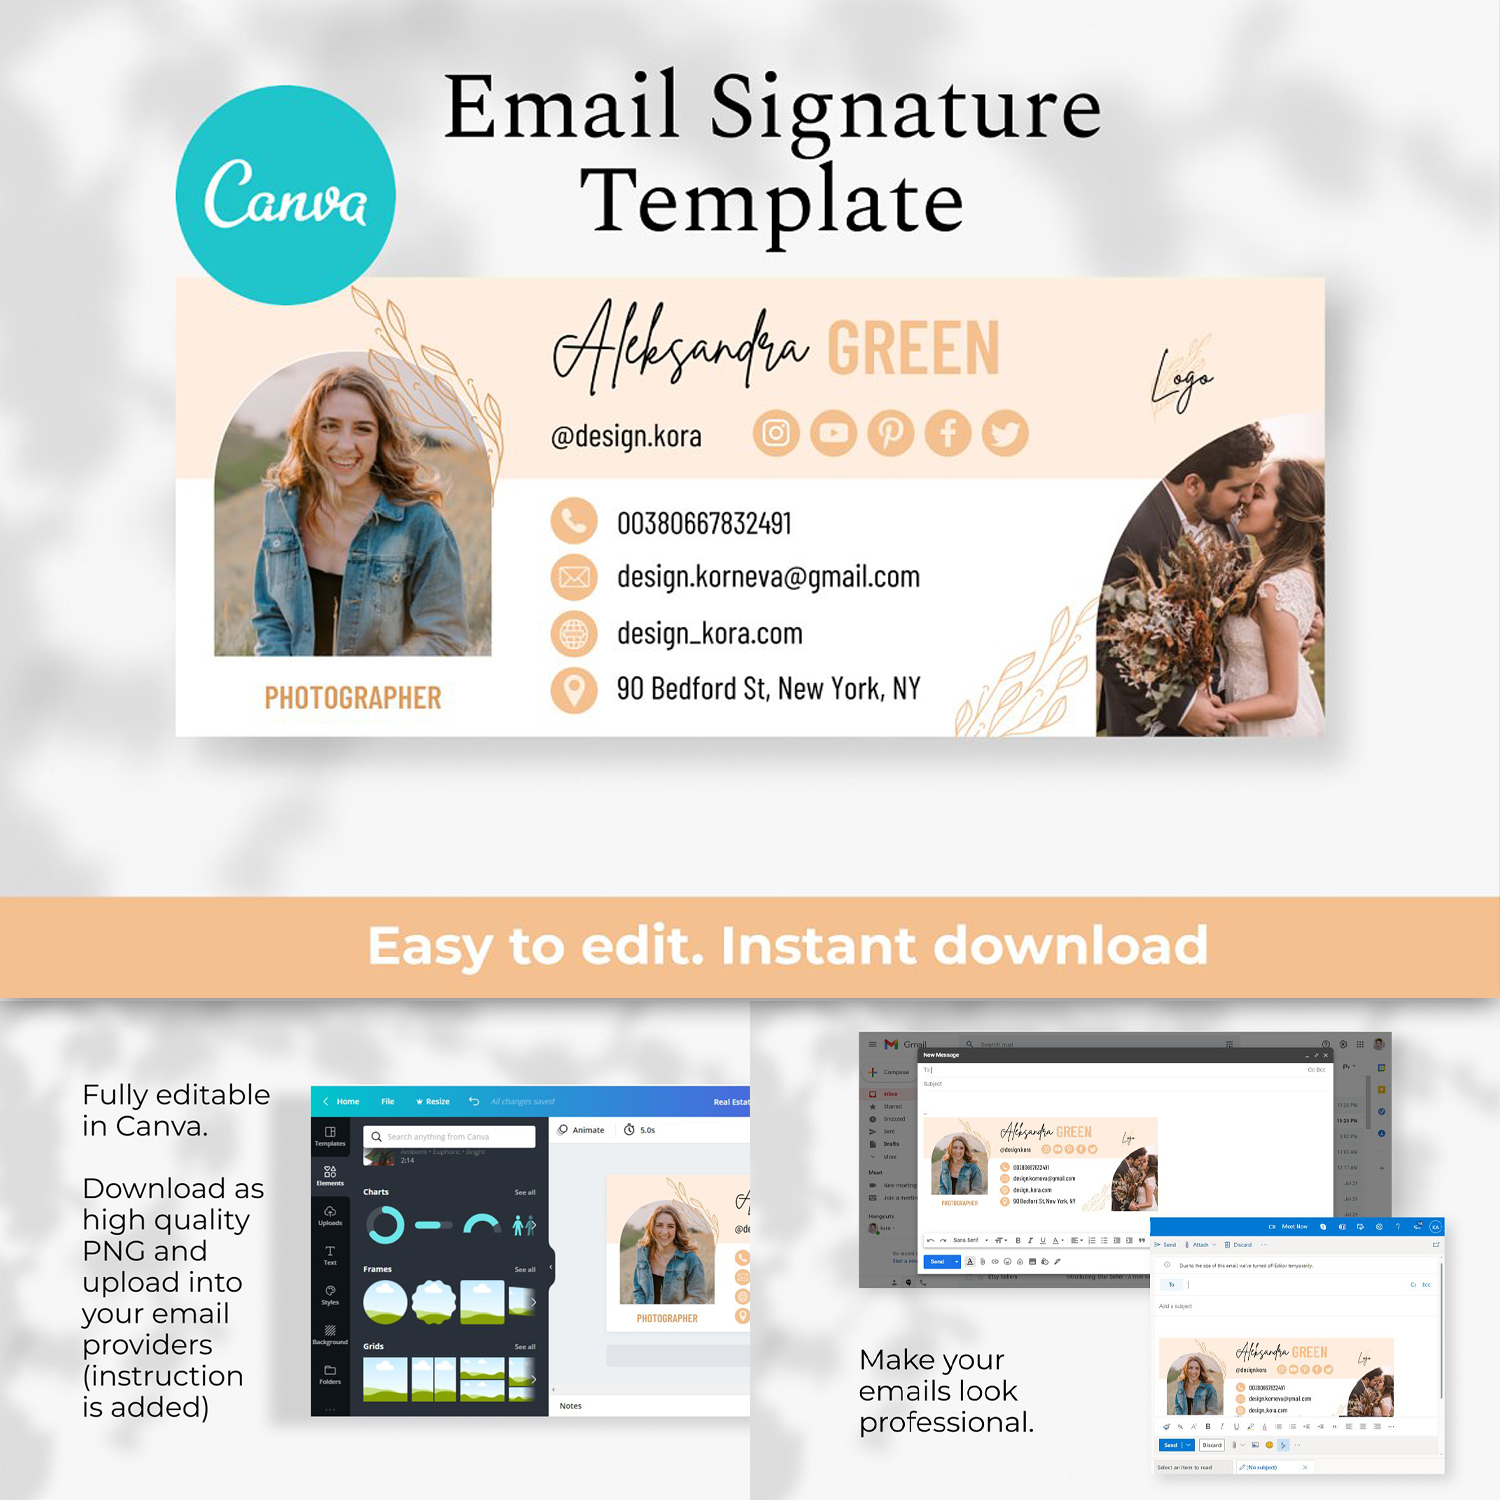 Email signature template.